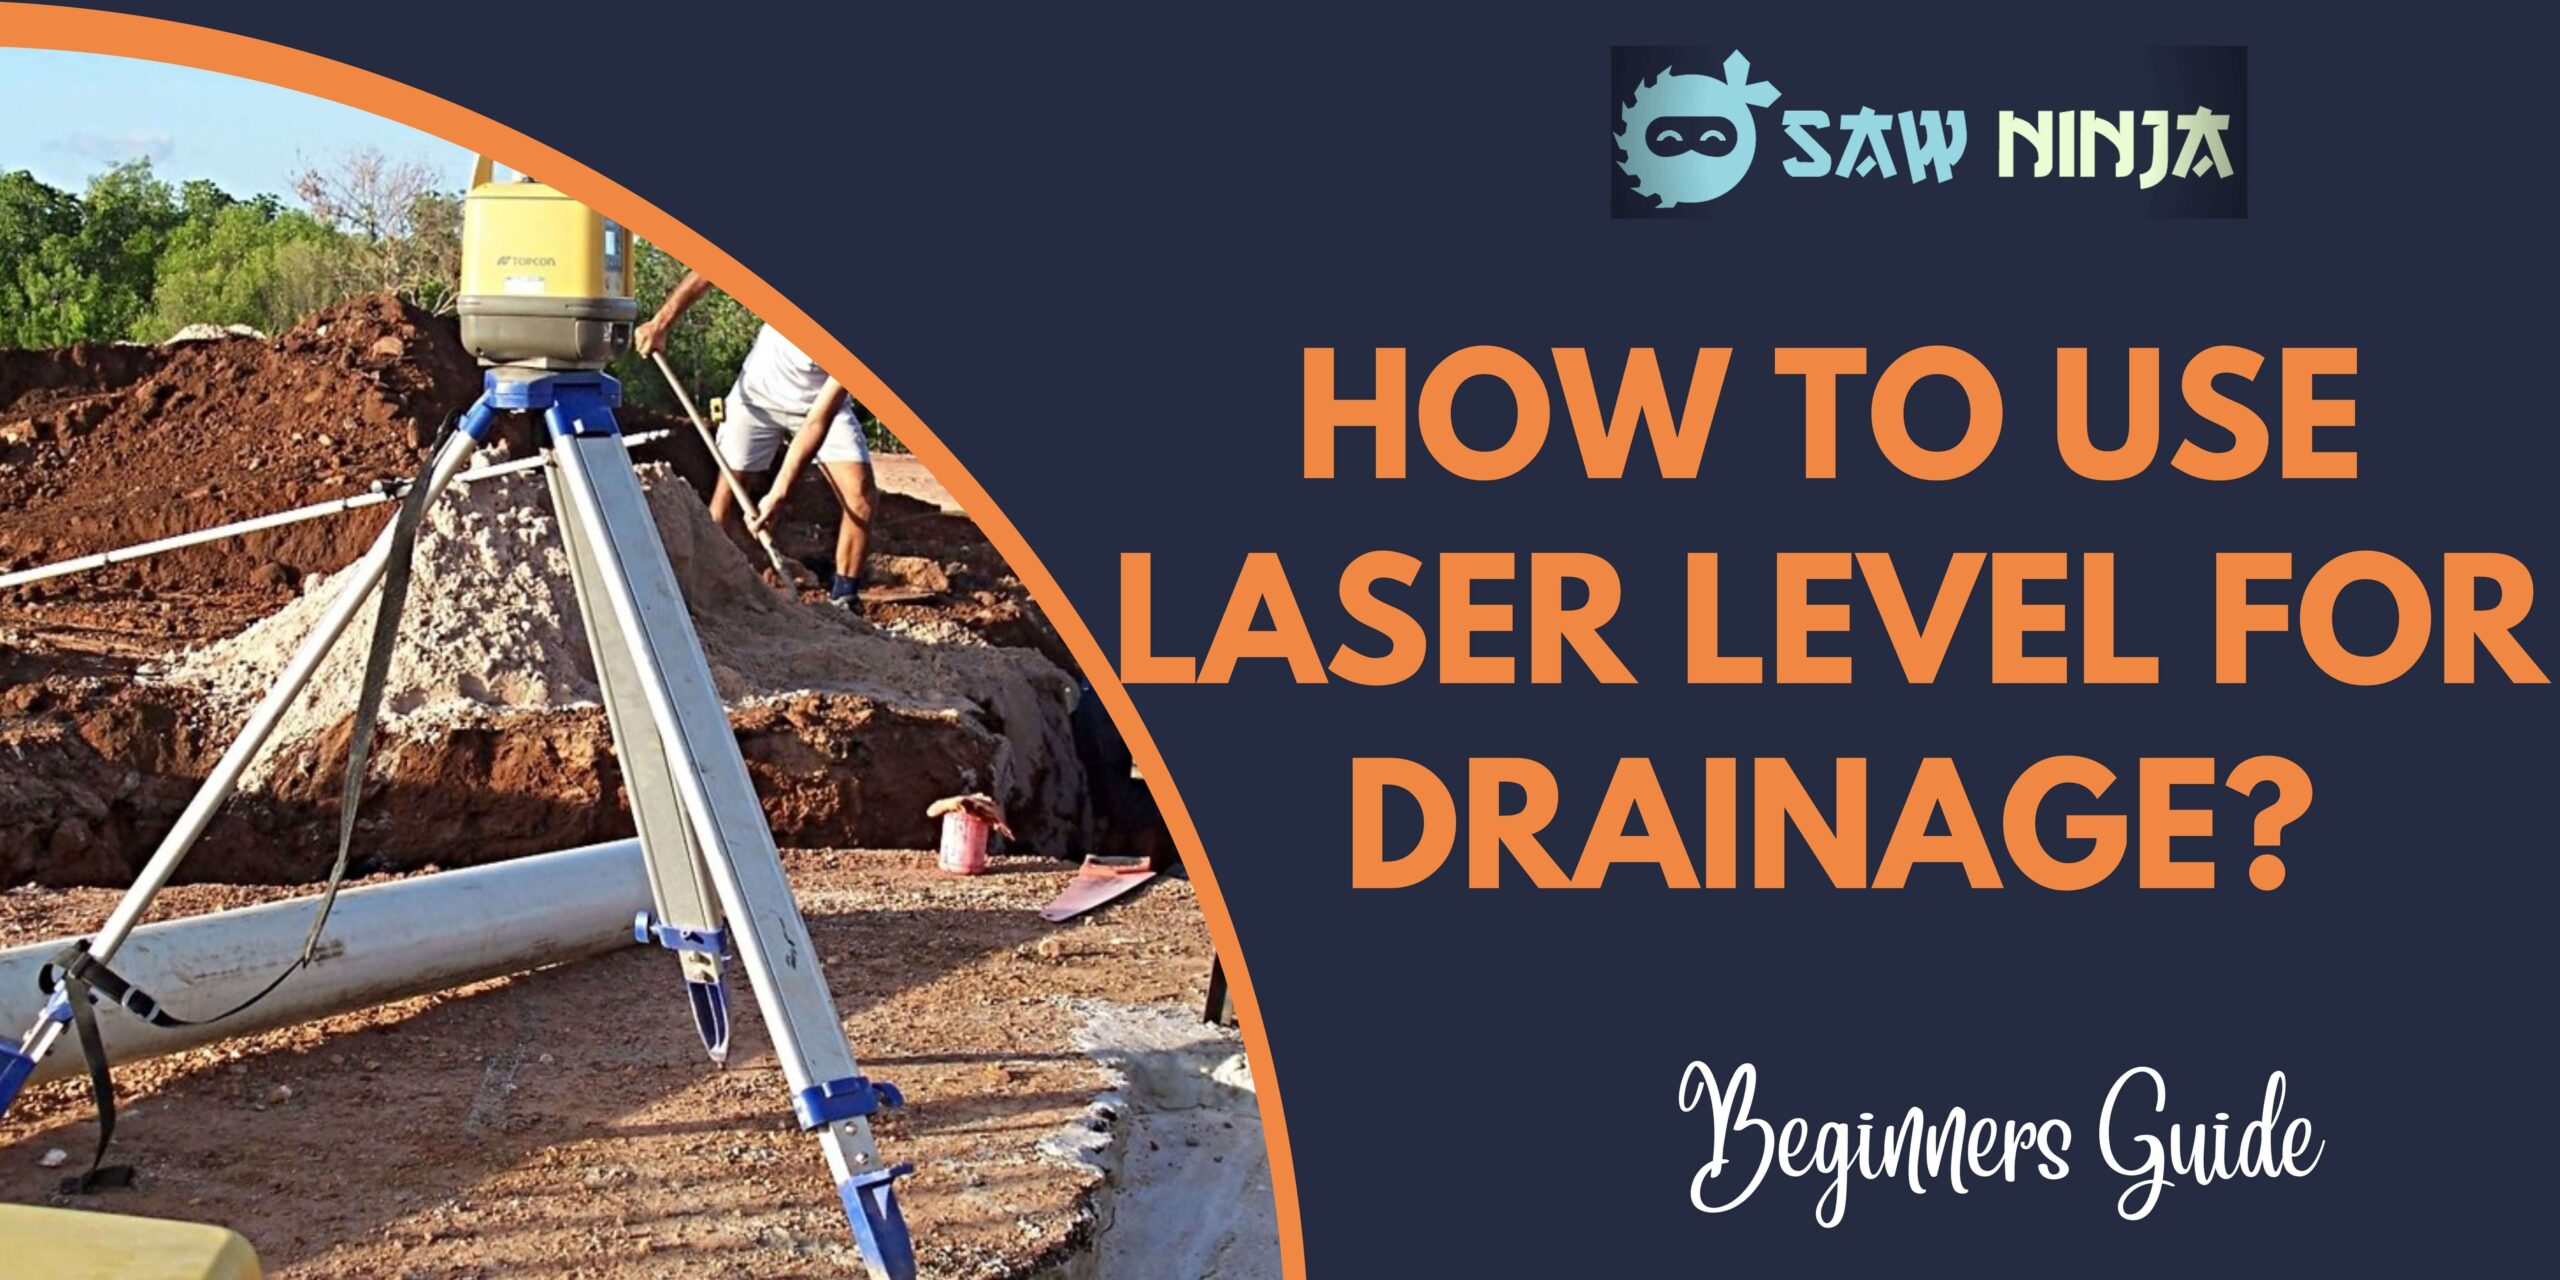 How to Use Laser Level for Drainage